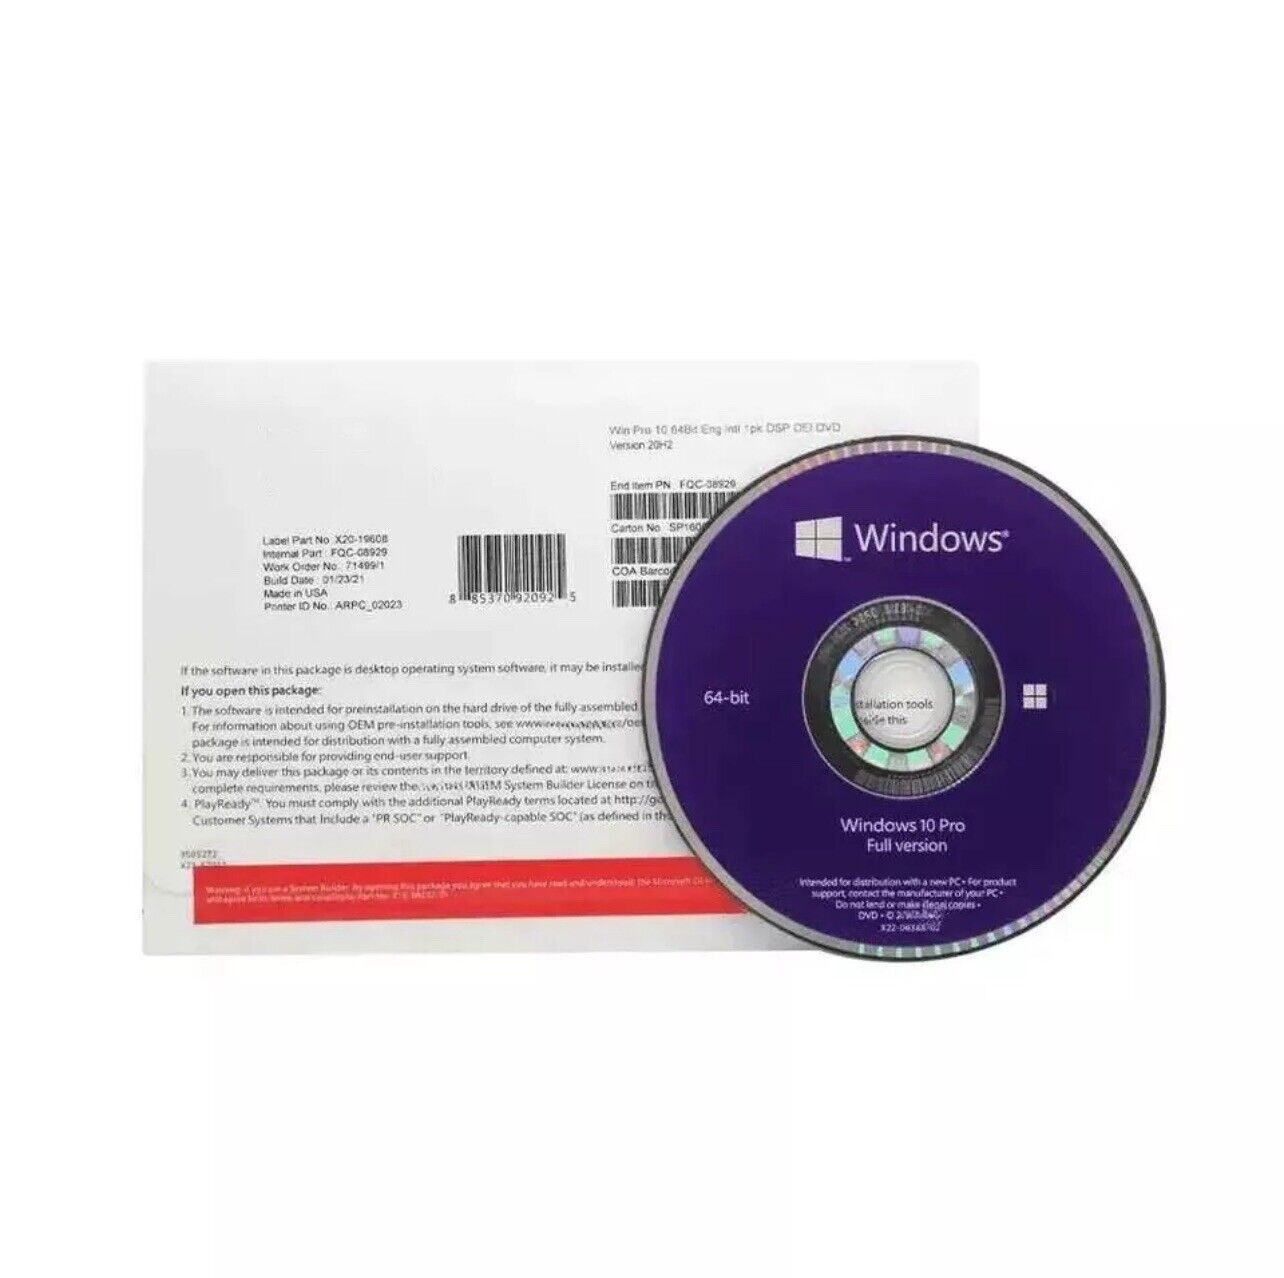 NEW Win 10 pro 64 bit DVD with Genuine License Product Key Sealed Brand New